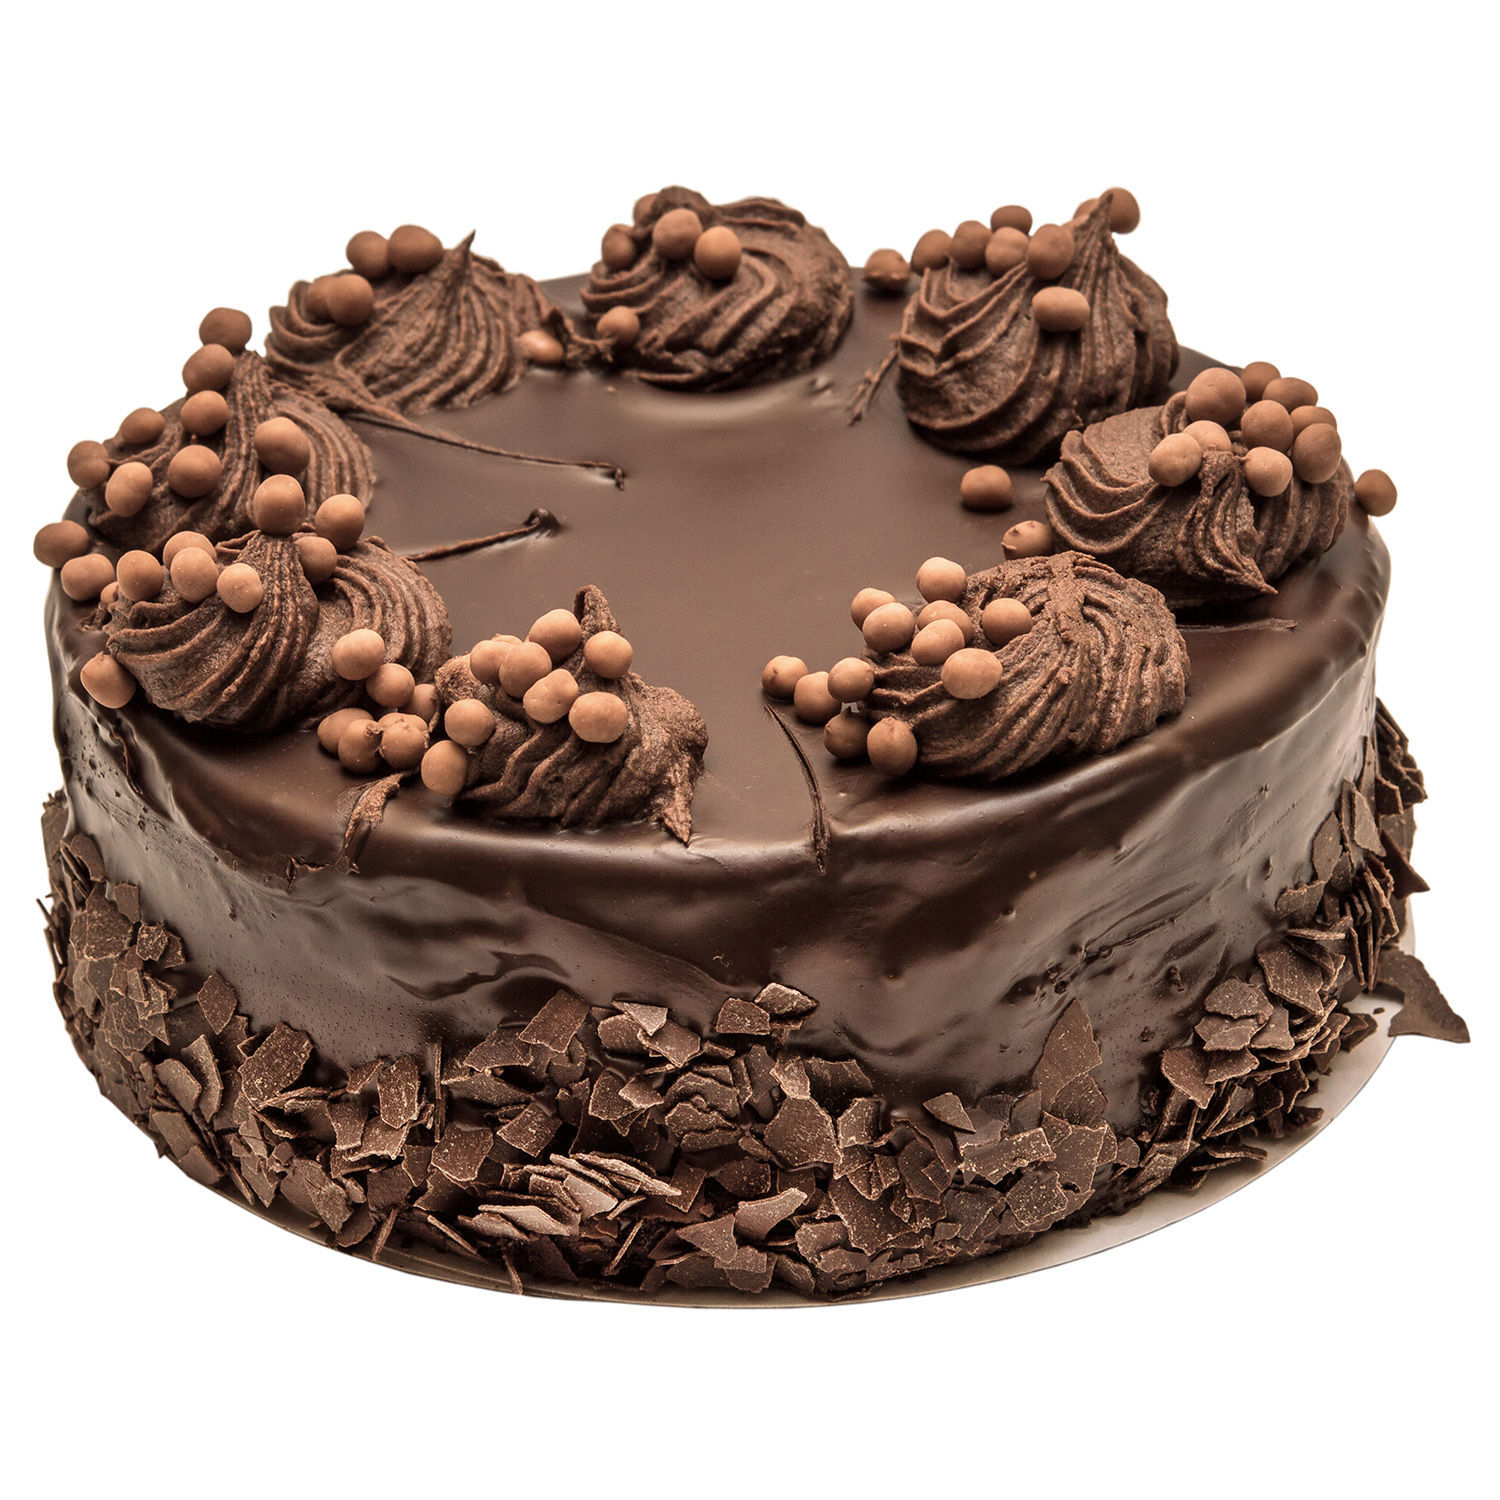 Buy/Send Death By Chocolate Cake 2 Kg Online- FNP